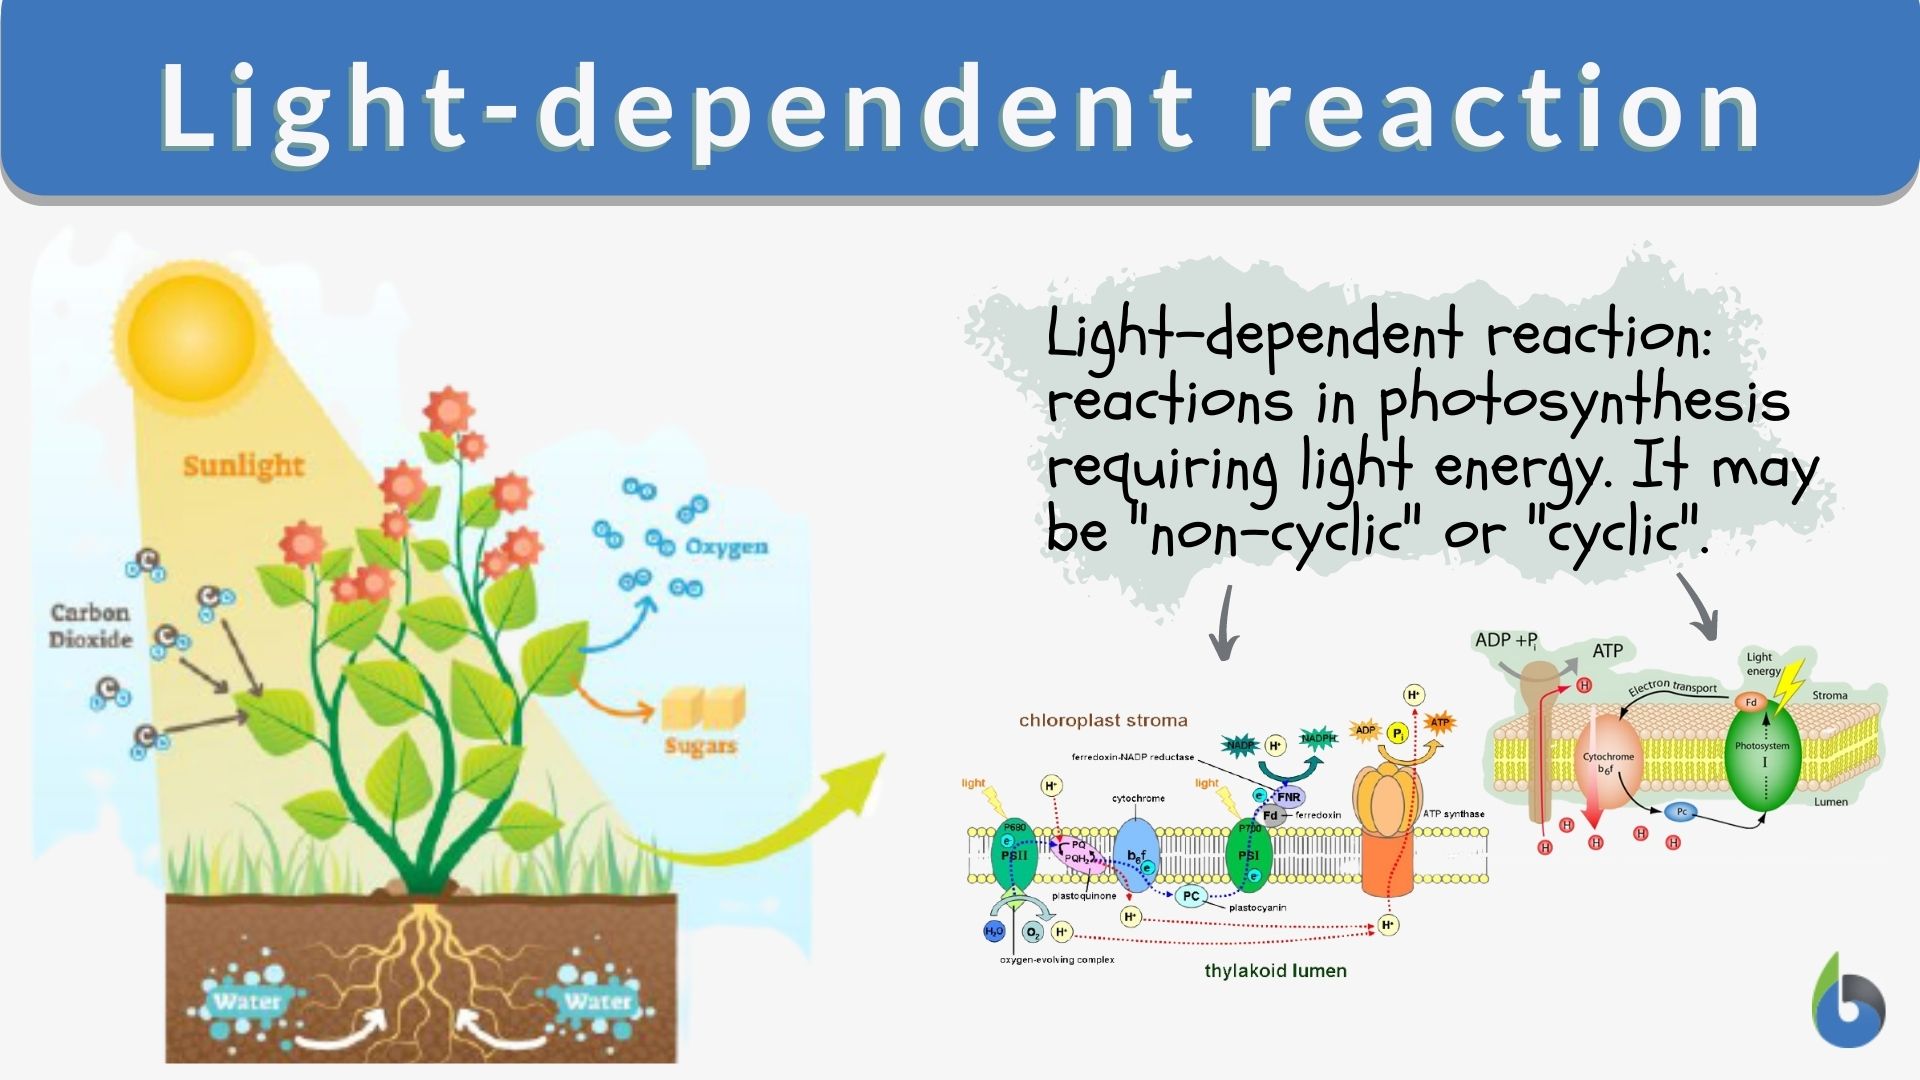 Light-dependent reaction - Definition and Examples - Biology Dictionary